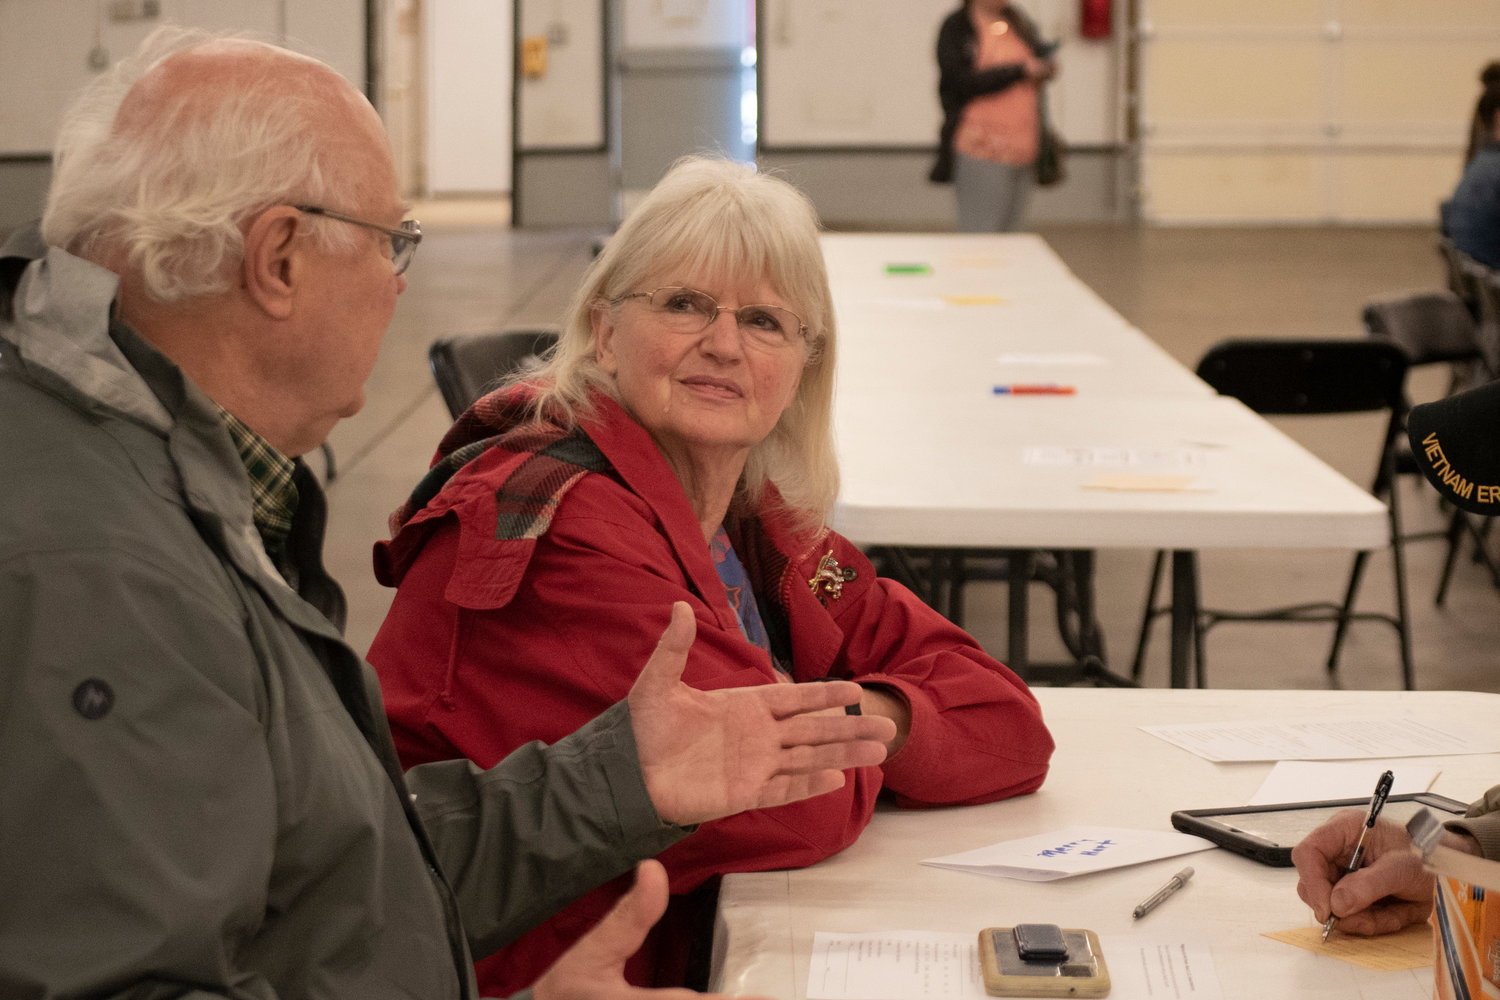 Larry McGee and Merry Hart discuss pros and cons of a proposed night-by-night shelter in Lewis County during a public forum on Thursday night at the Southwest Washington Fairgrounds.